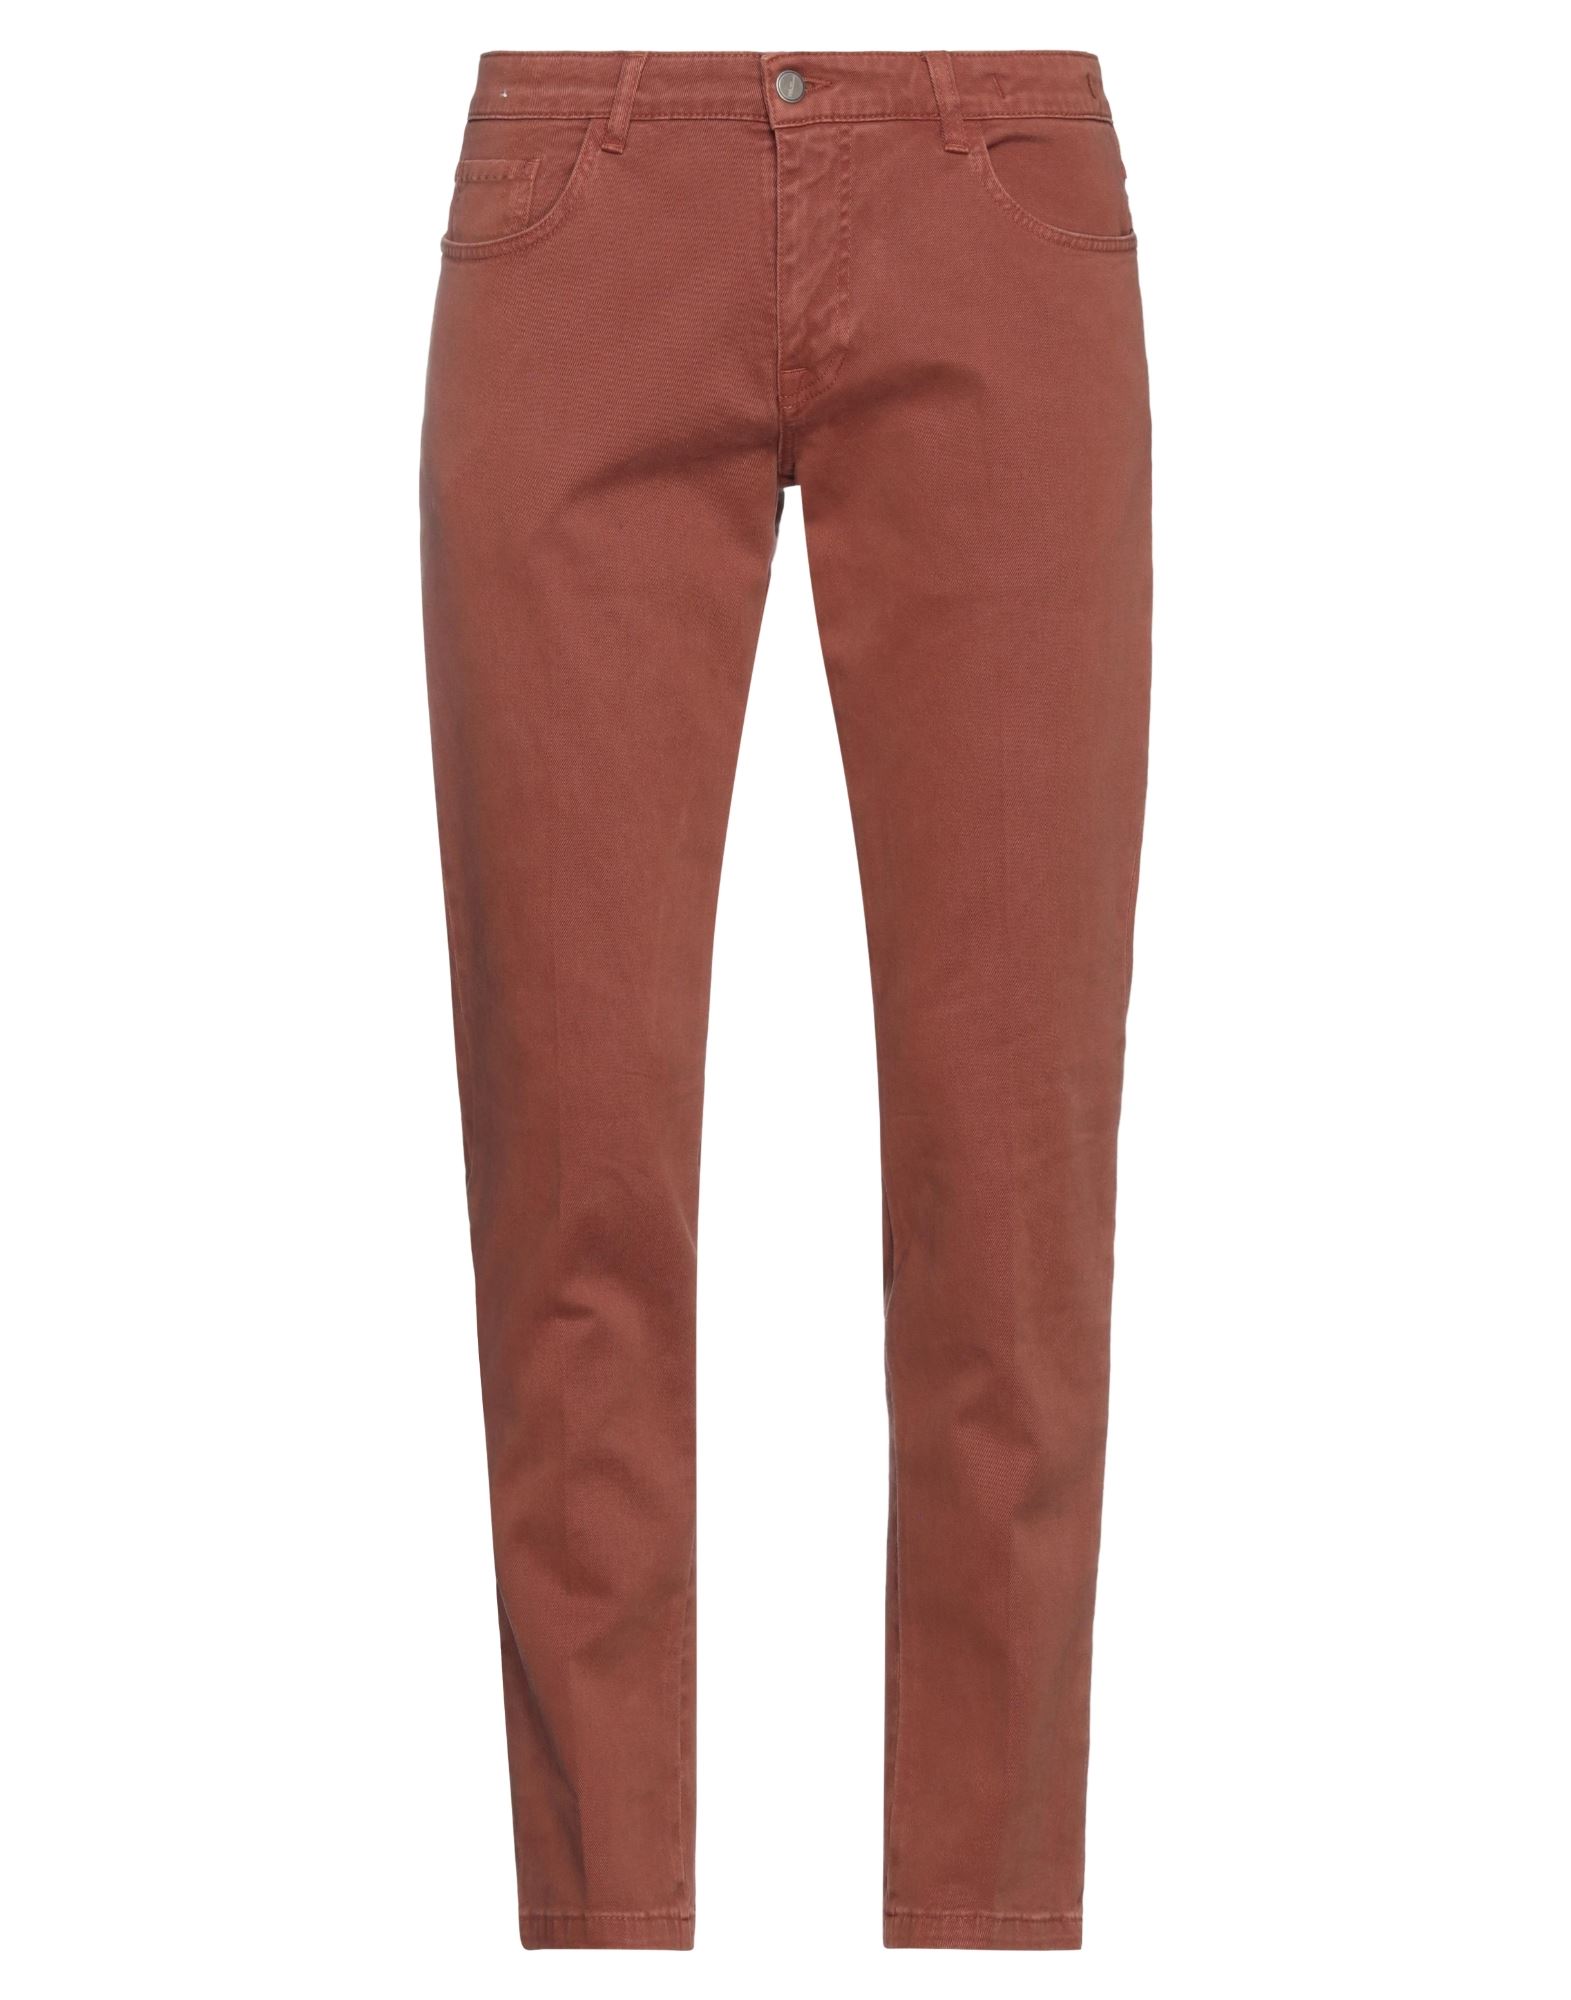 Betwoin Man Pants Rust Size 32 Cotton, Elastane In Red